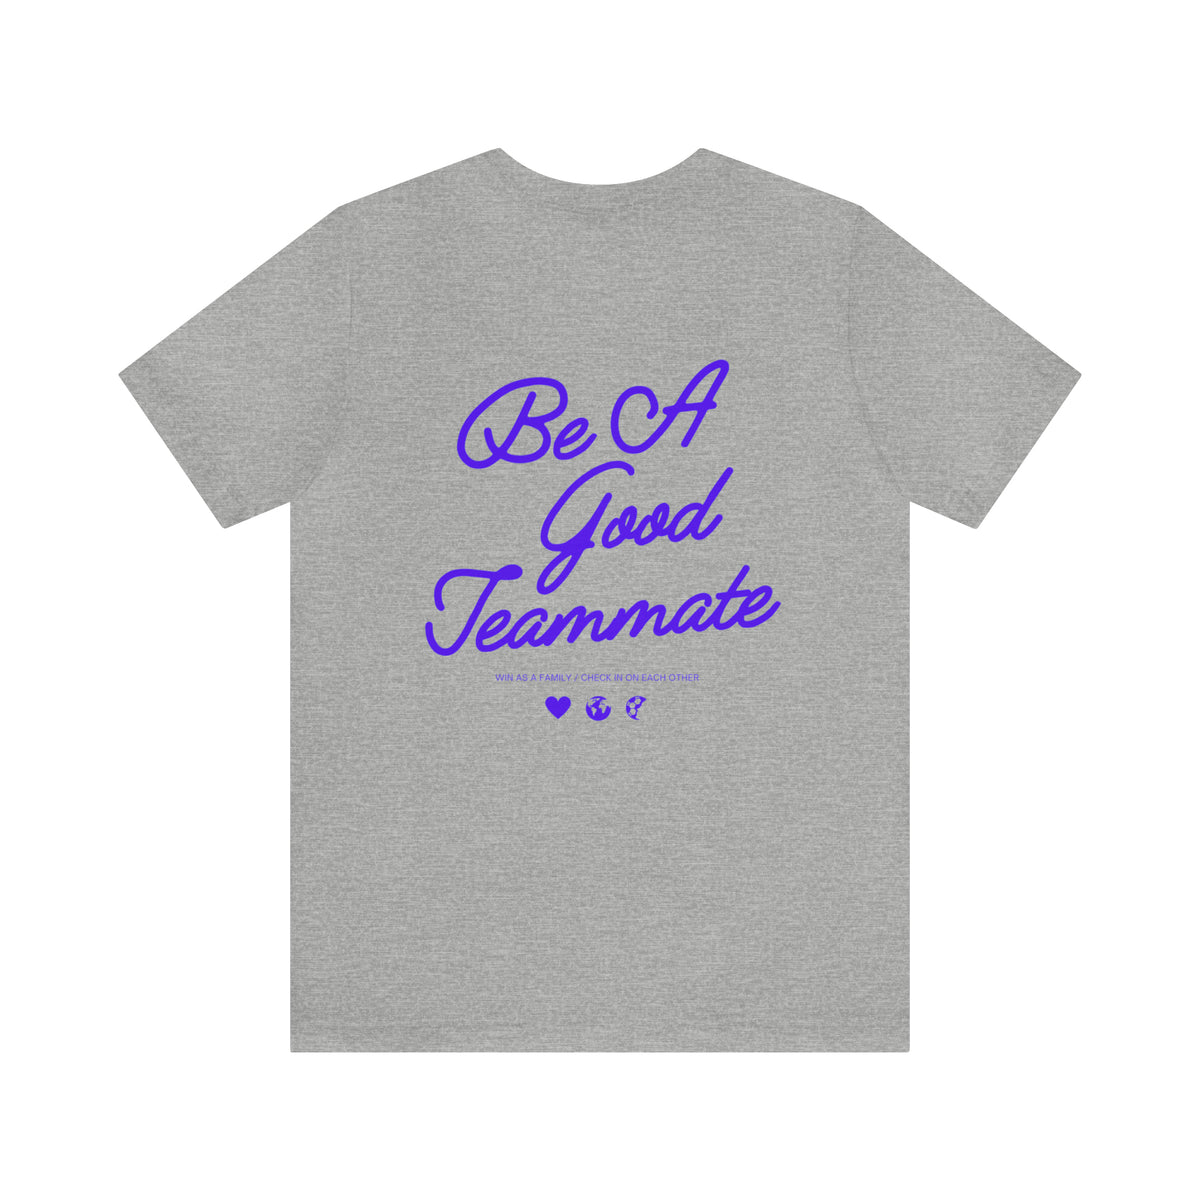 Be A Good Teammate Adult T-Shirt